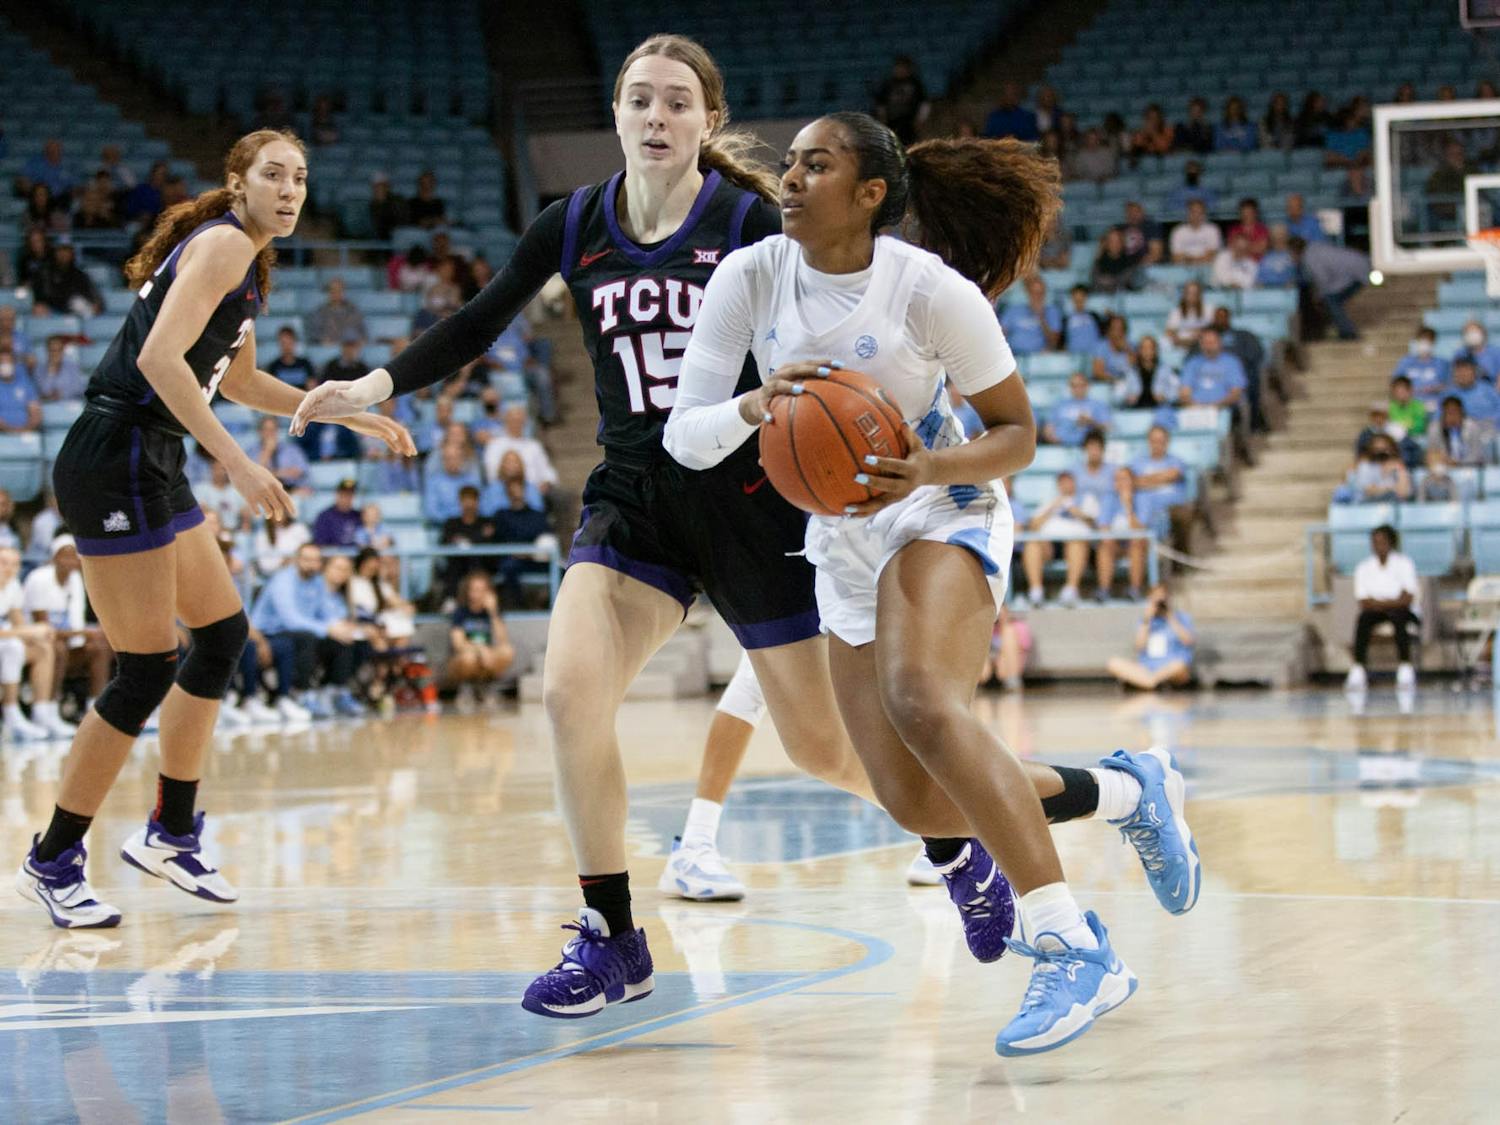 UNC junior guard Deja Kelly (25) dribbles the ball during the women's basketball game against TCU on Saturday, Nov. 11, 2022, at Carmicheal Arena. UNC beat TCU 75-48.